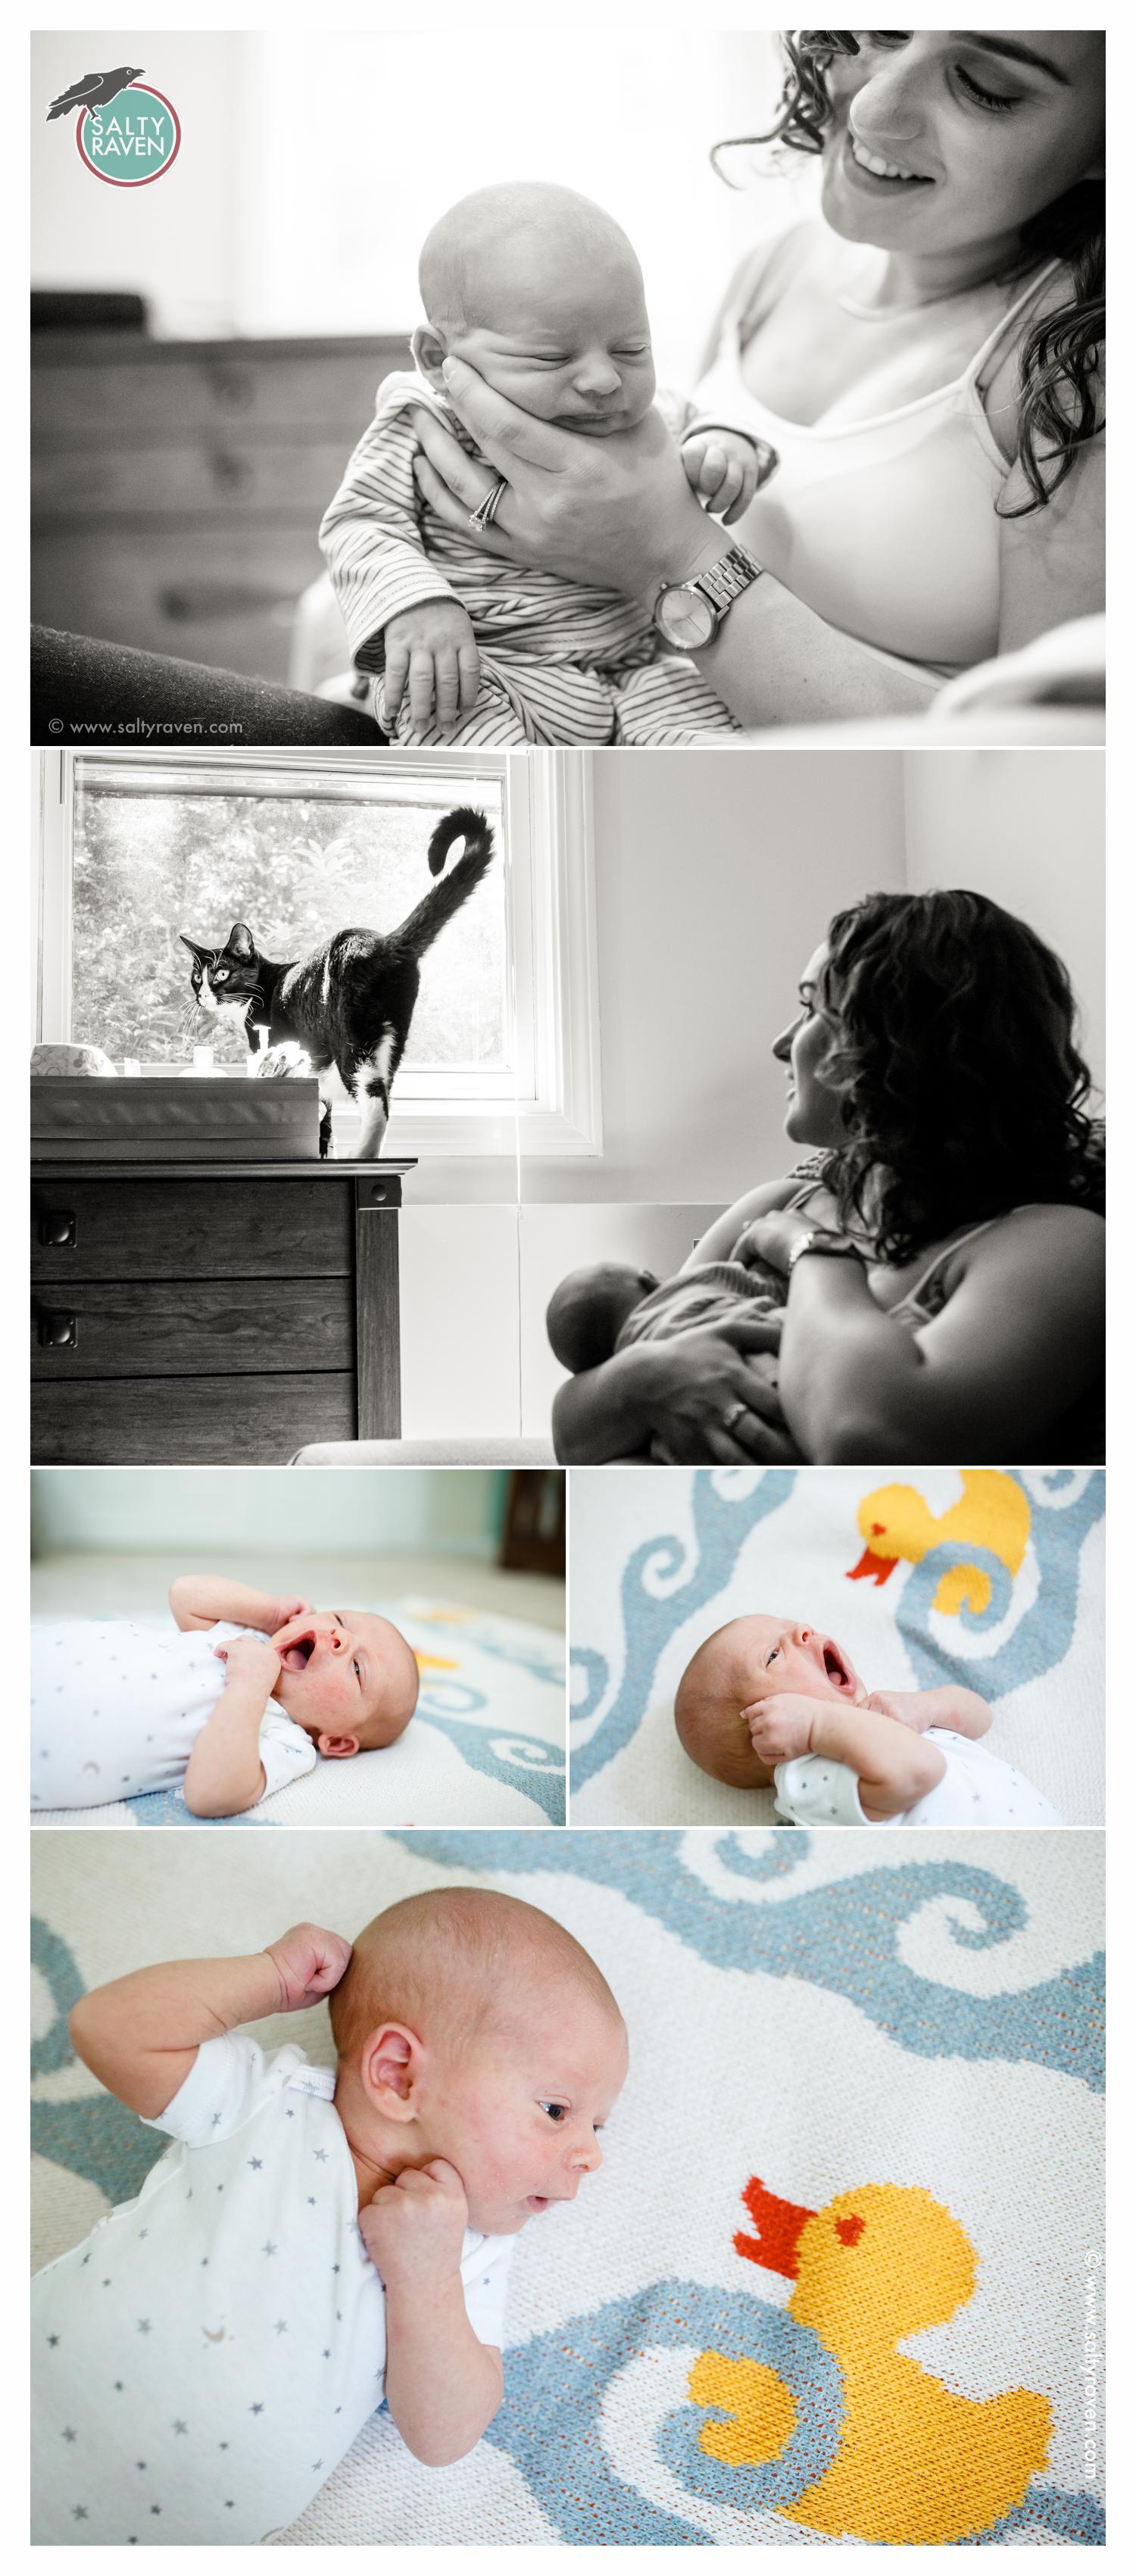 Newborn on blanket and a cat in the window.